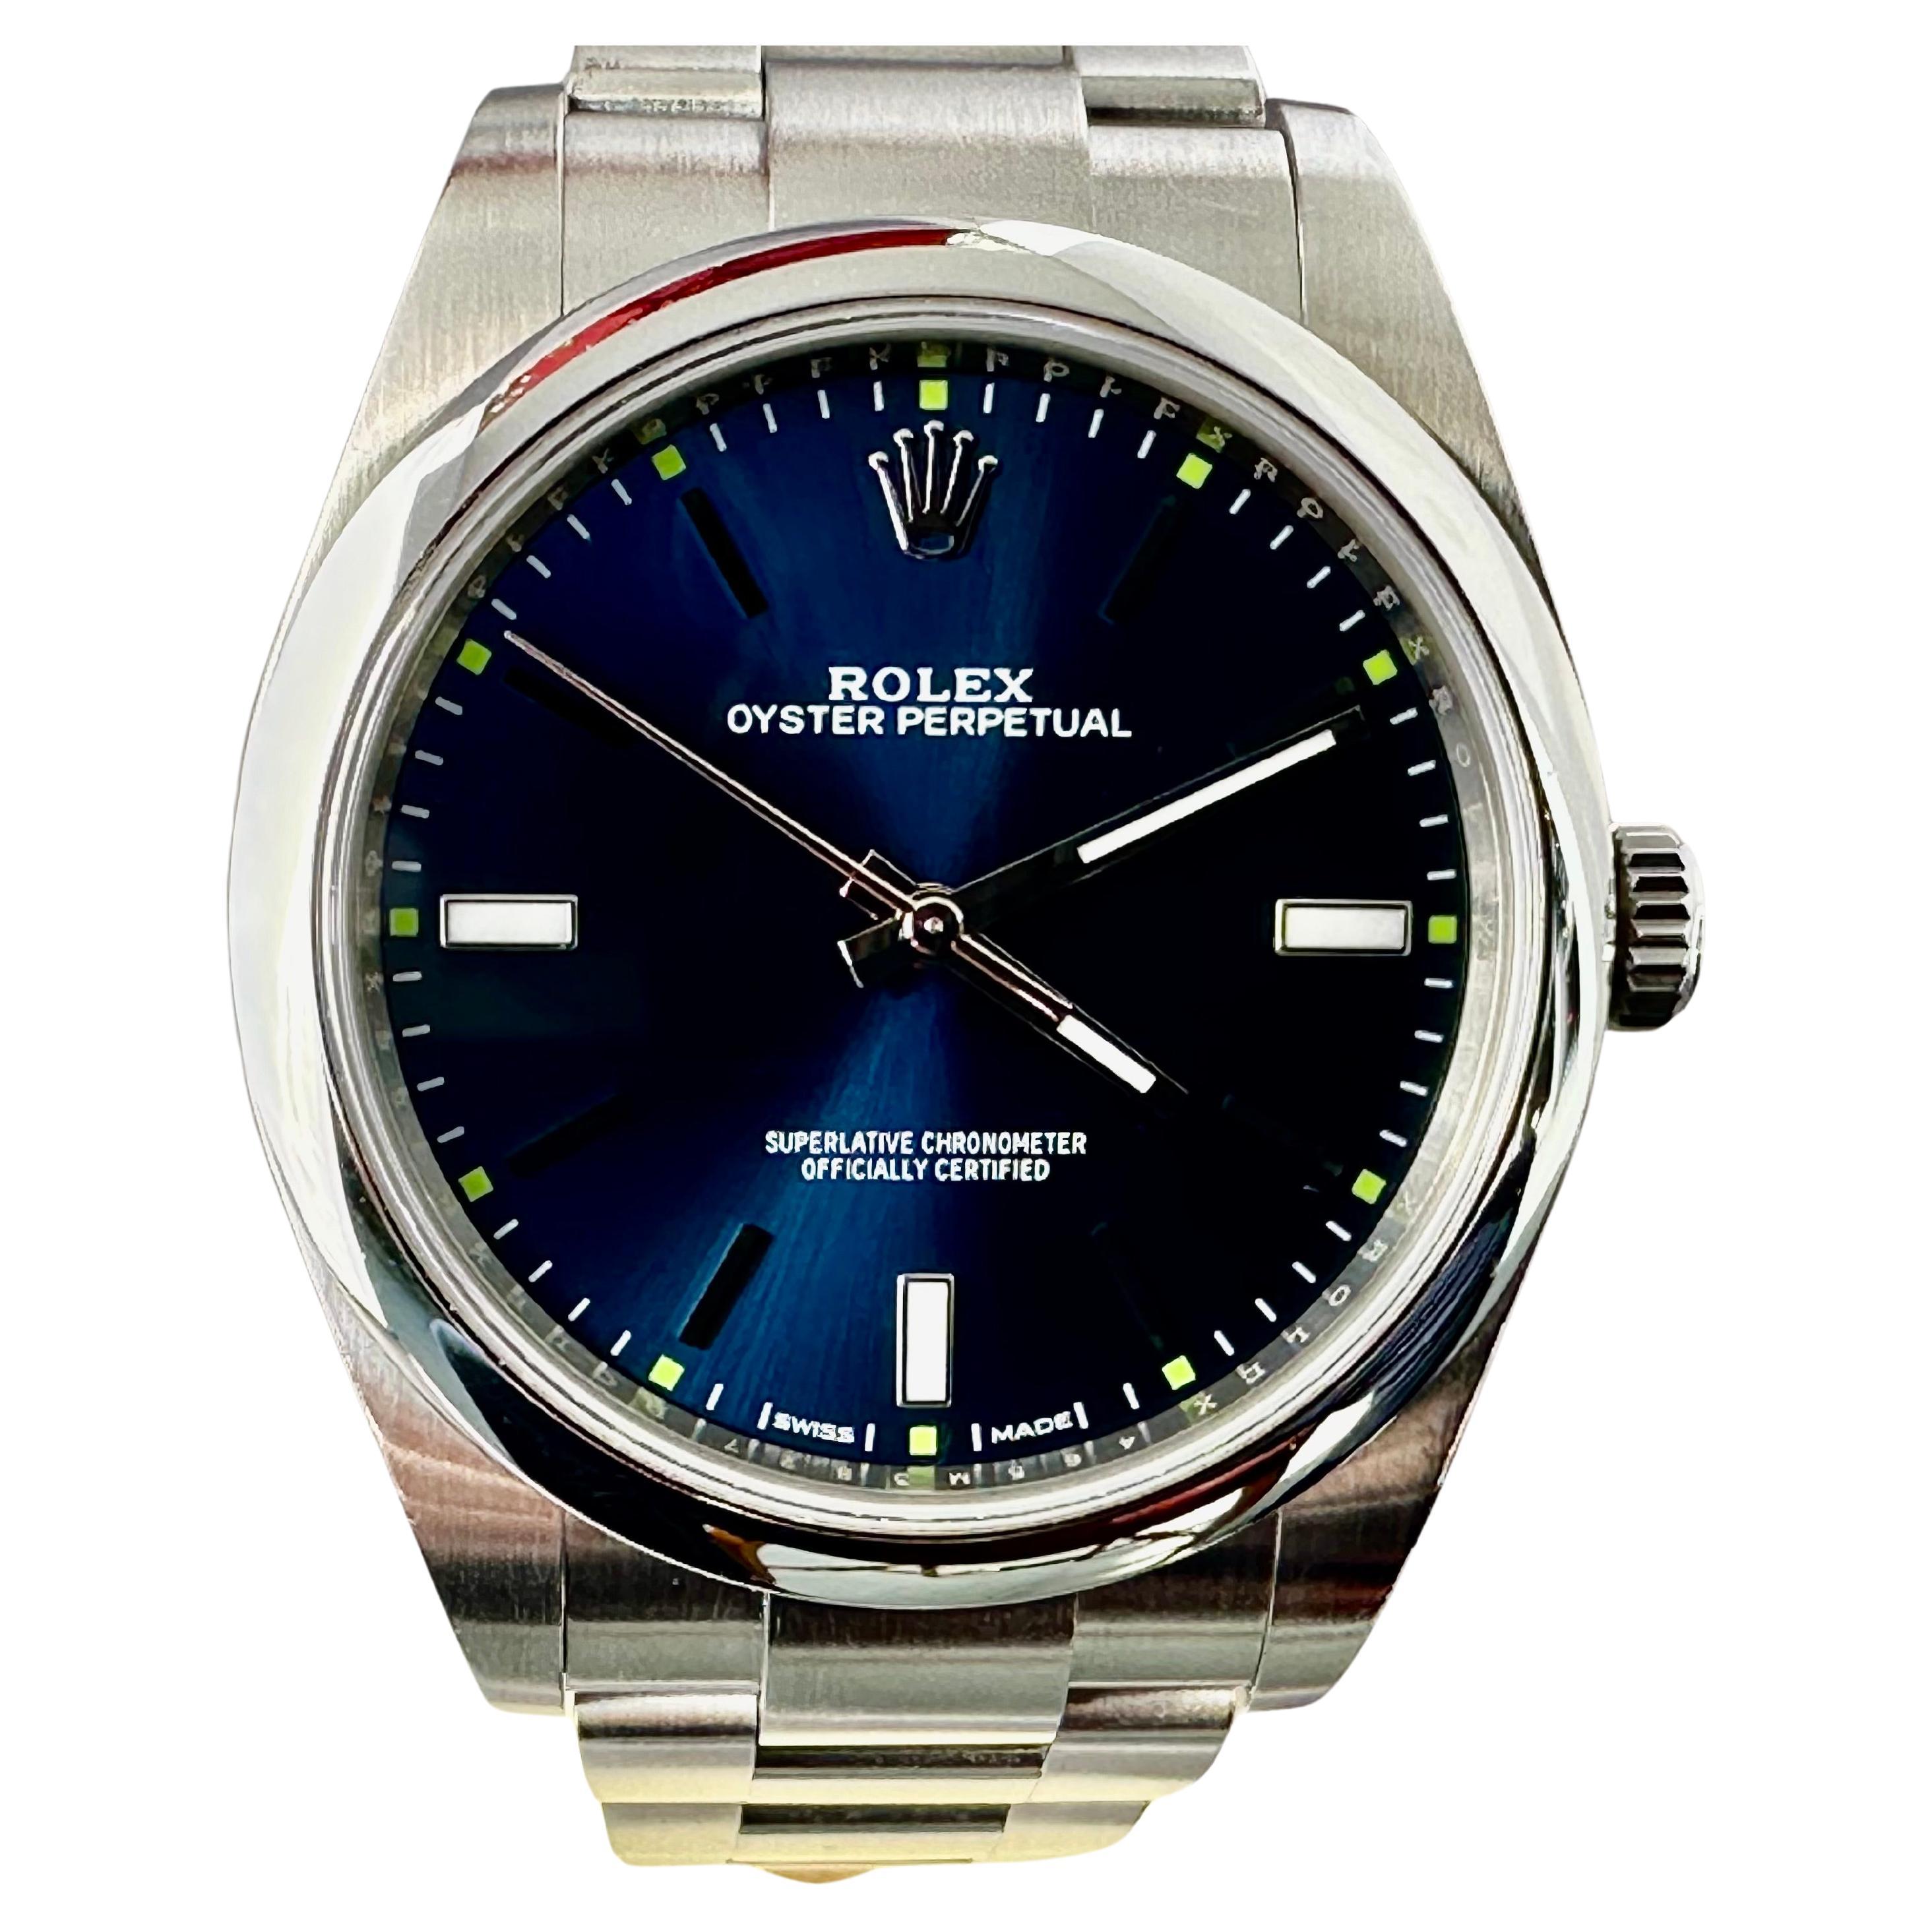 Rolex Oyster Perpetual #114300 39mm Stainless Steel w/ Blue Dial For Sale